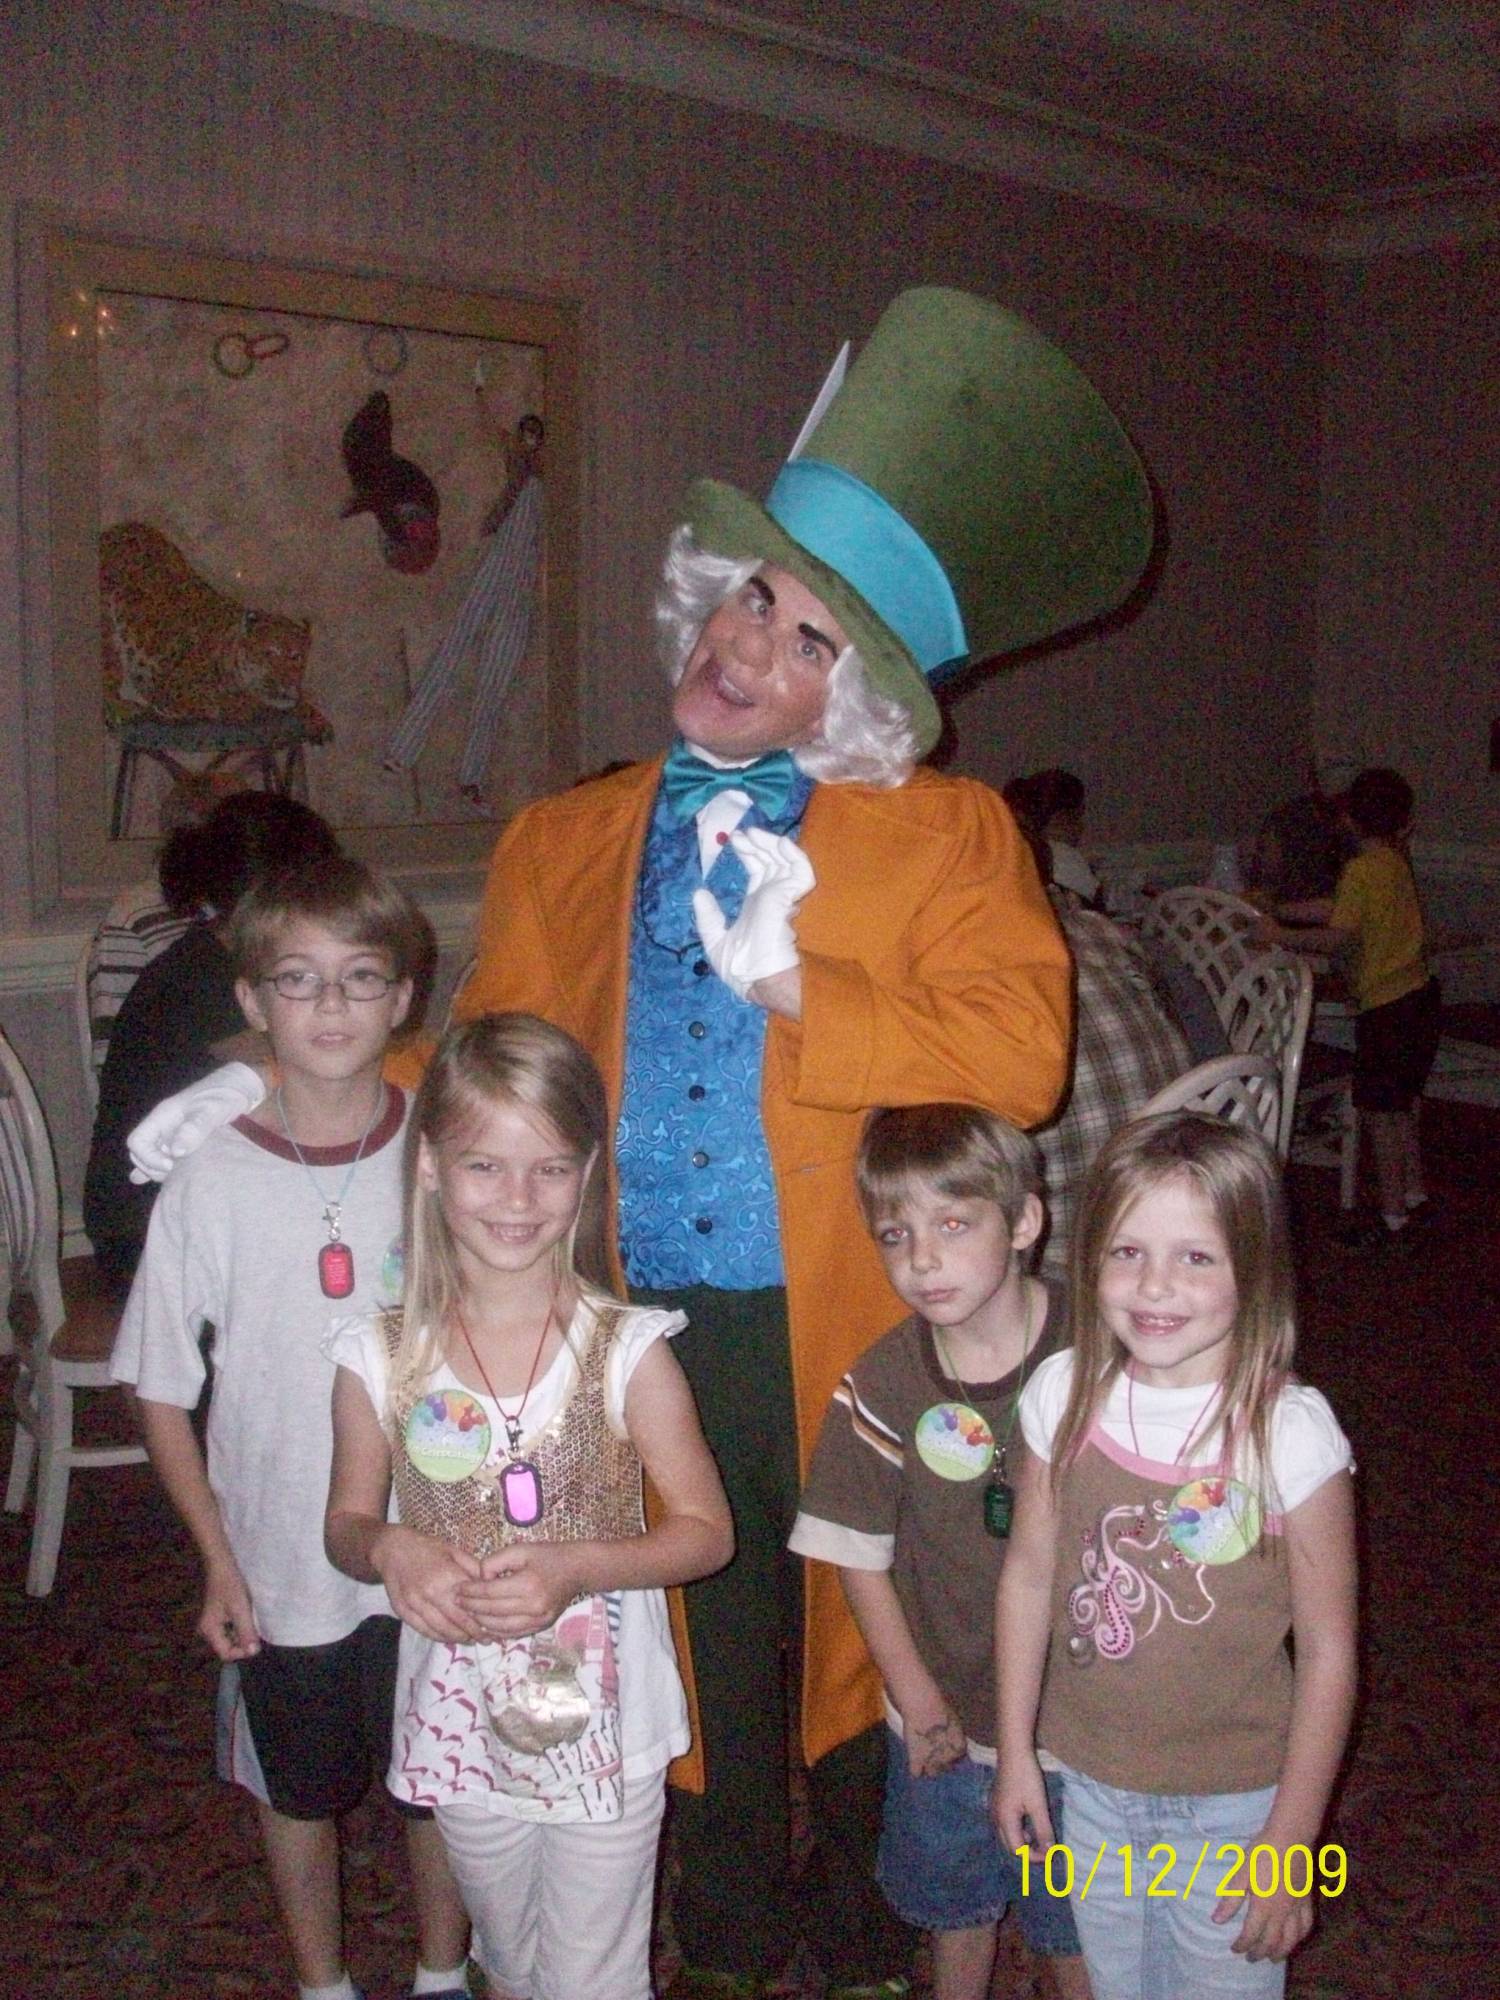 Grand Floridian - 1900 Park Fare - Mad Hatter